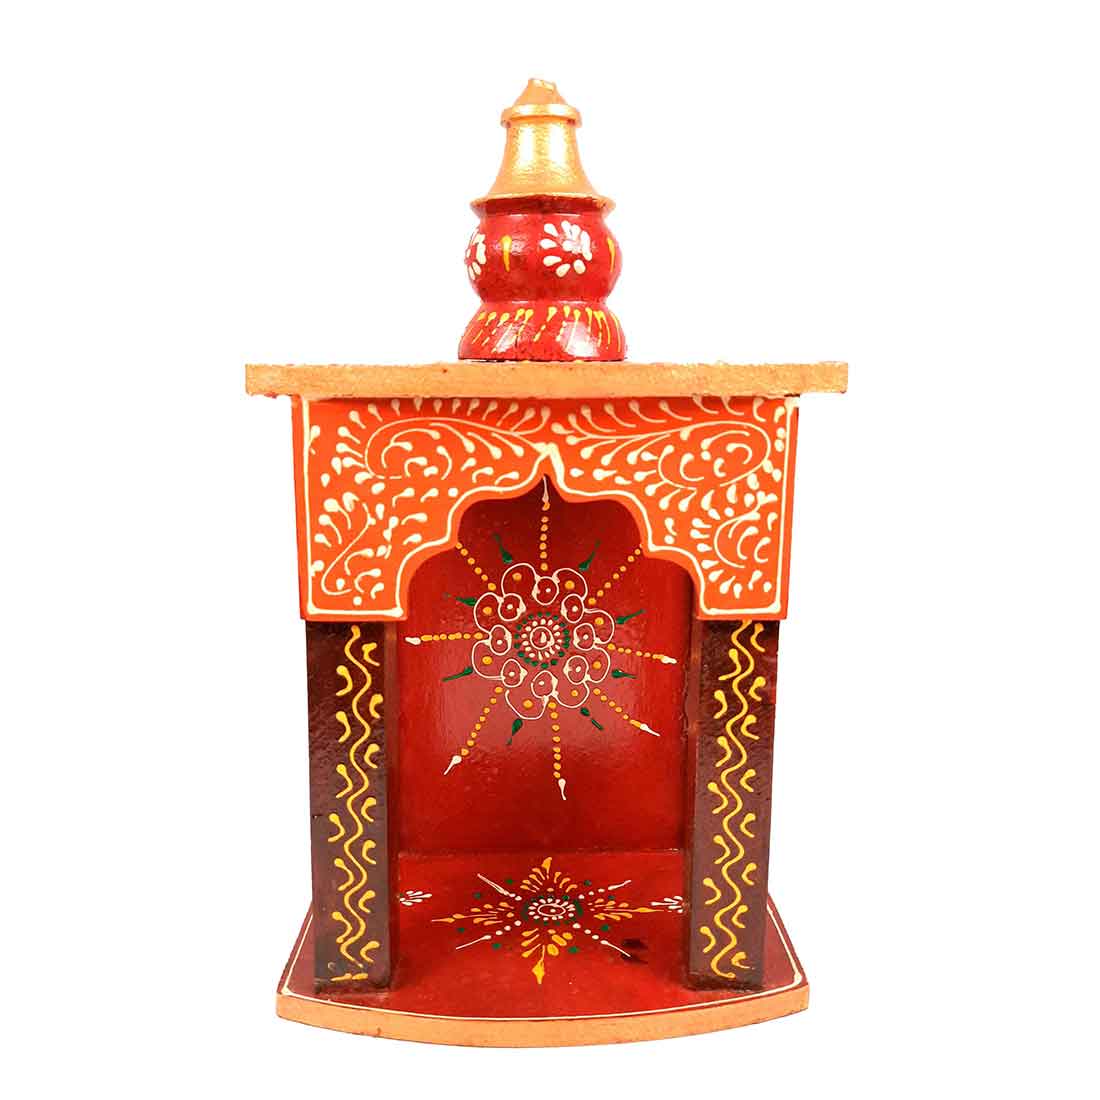 Pooja Mandir for Your Puja Ghar | Wooden Wall Hanging Puja Stand | God Temple For Home Office & Shop With Detachable Gumbad - 10 Inch